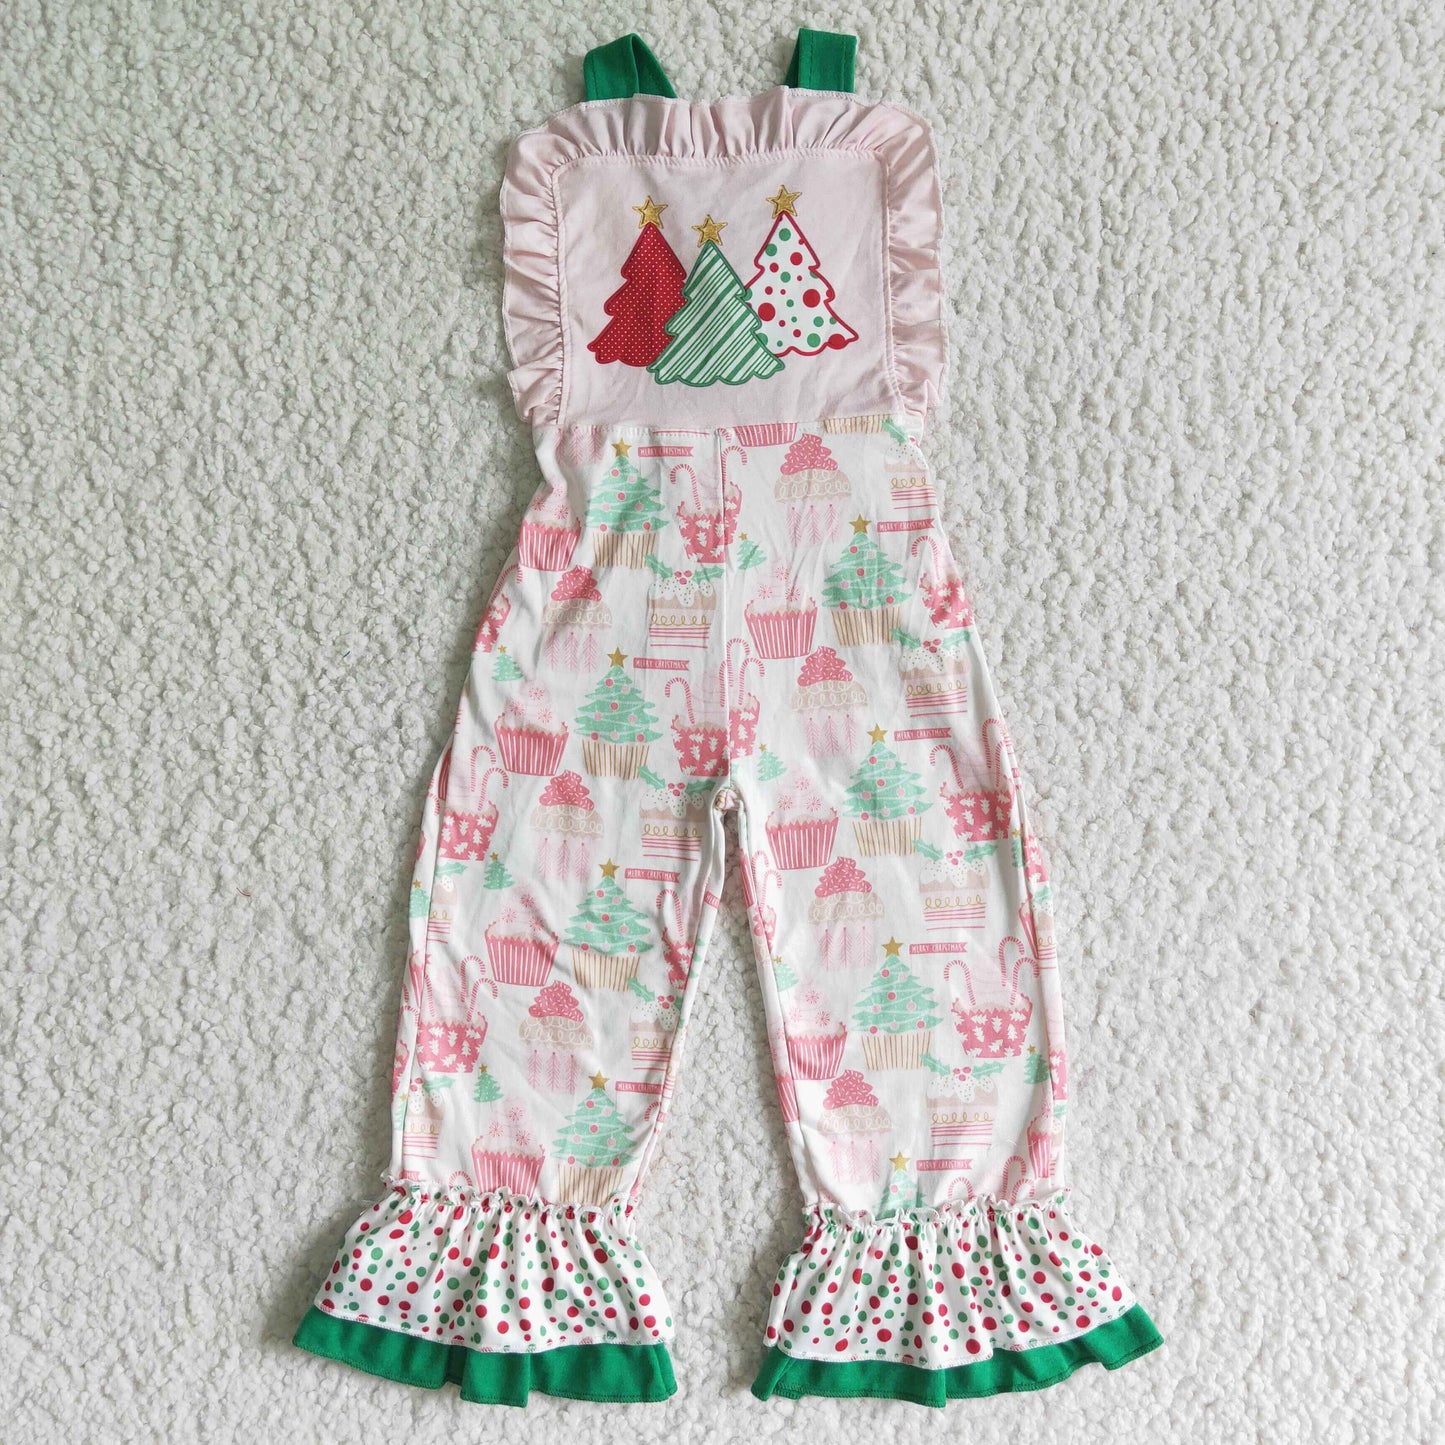 GLP0950 Red Cotton Top Pink Cake Print Overall Girls Jumpsuits Christmas Clothes Sets